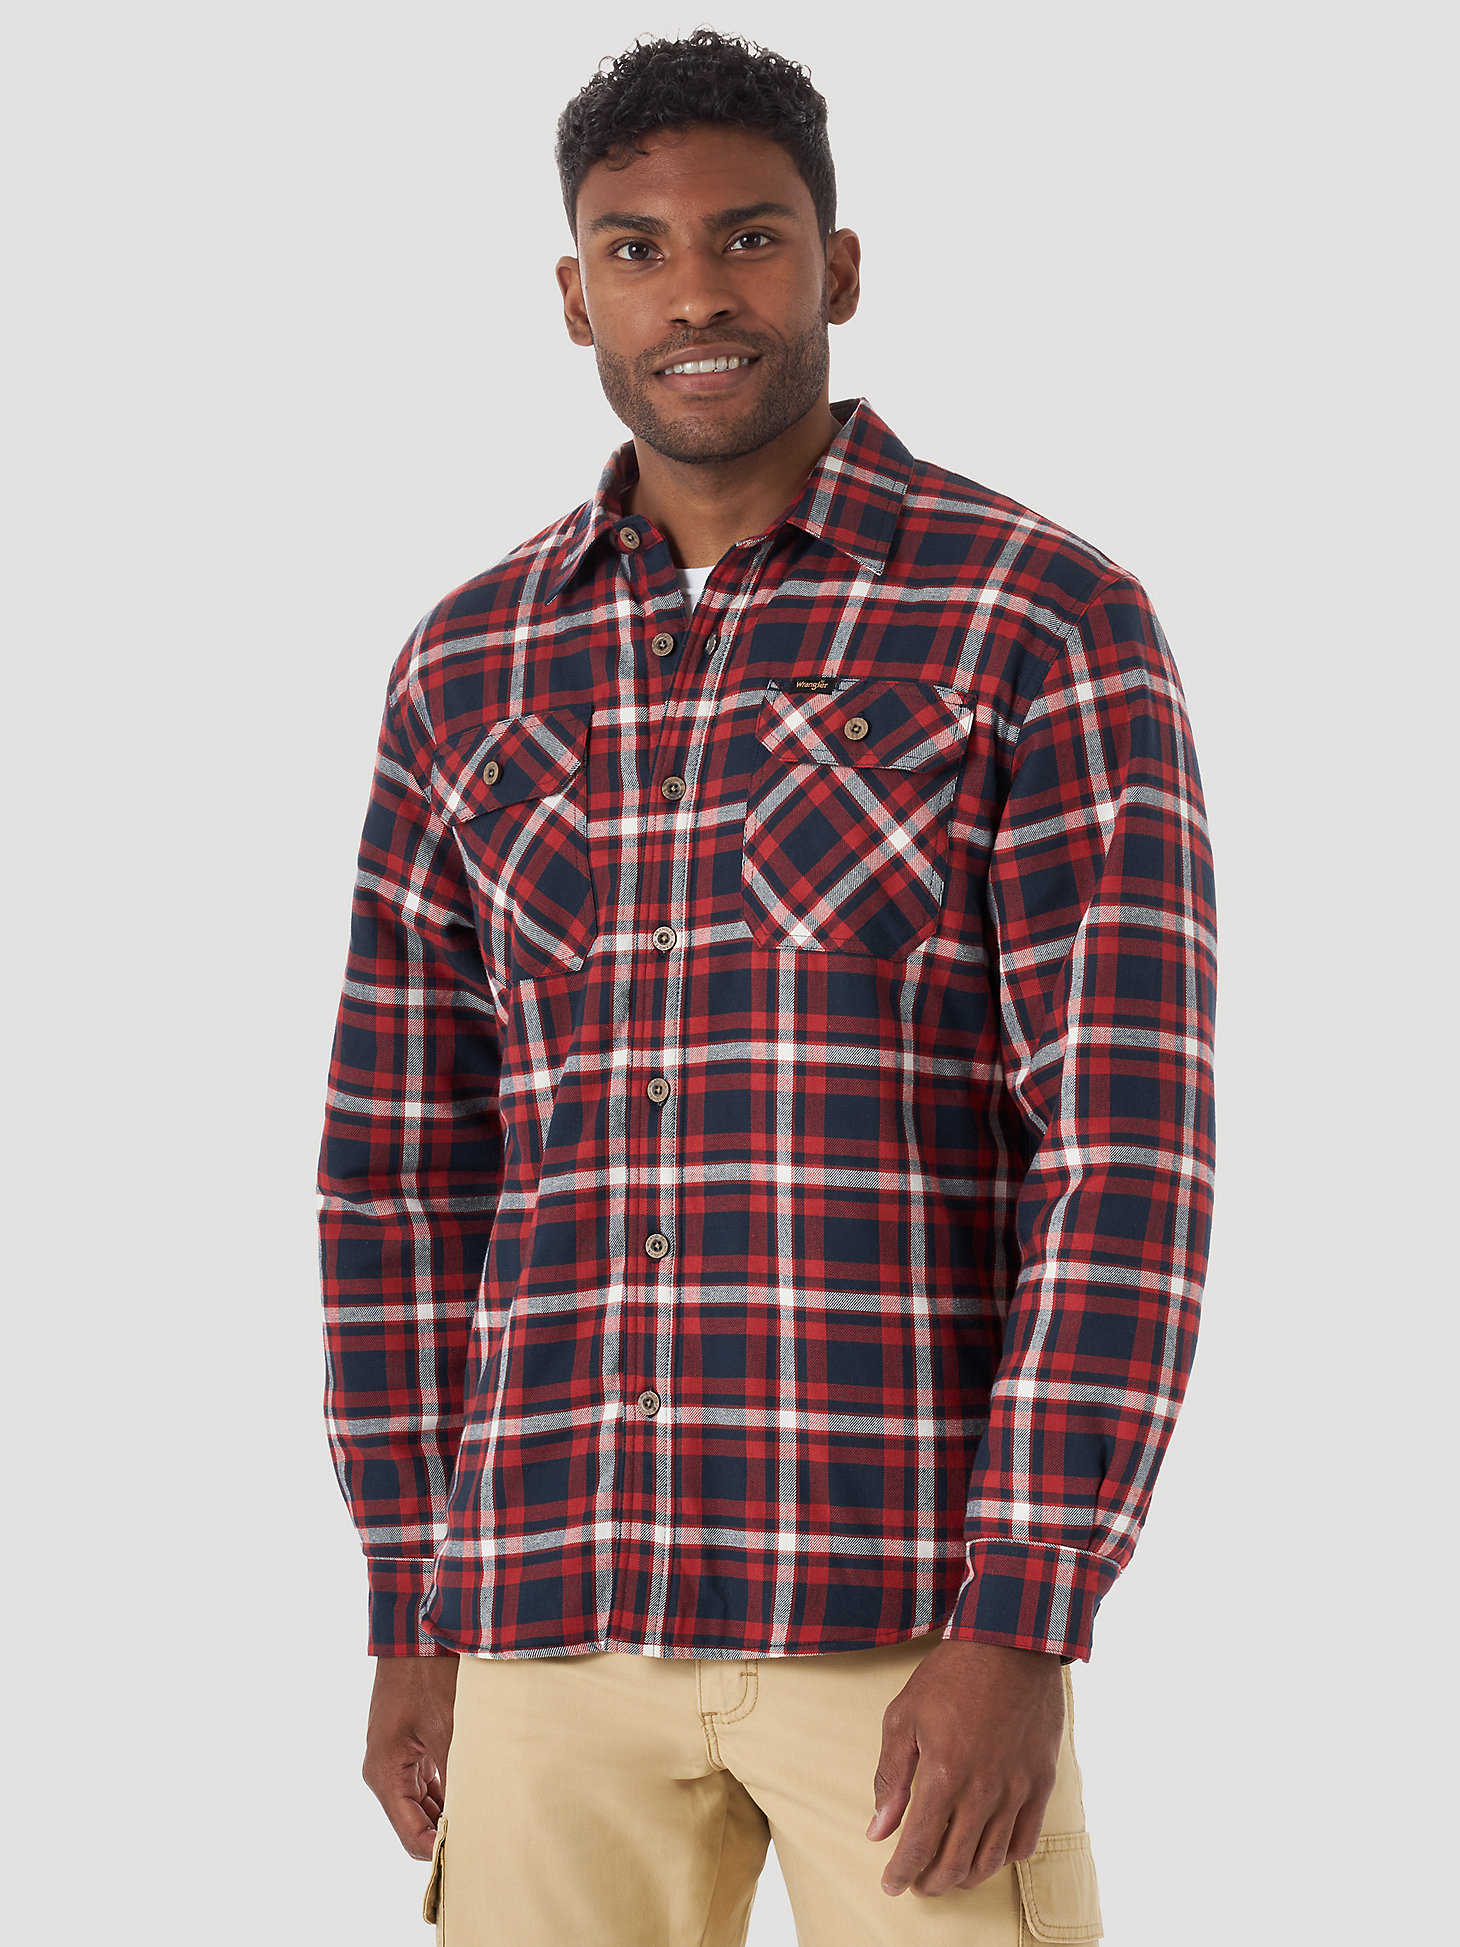 Men's Wrangler® Brushed Cotton Sherpa Lined Shirt Jacket in Navy/Red alternative view 5